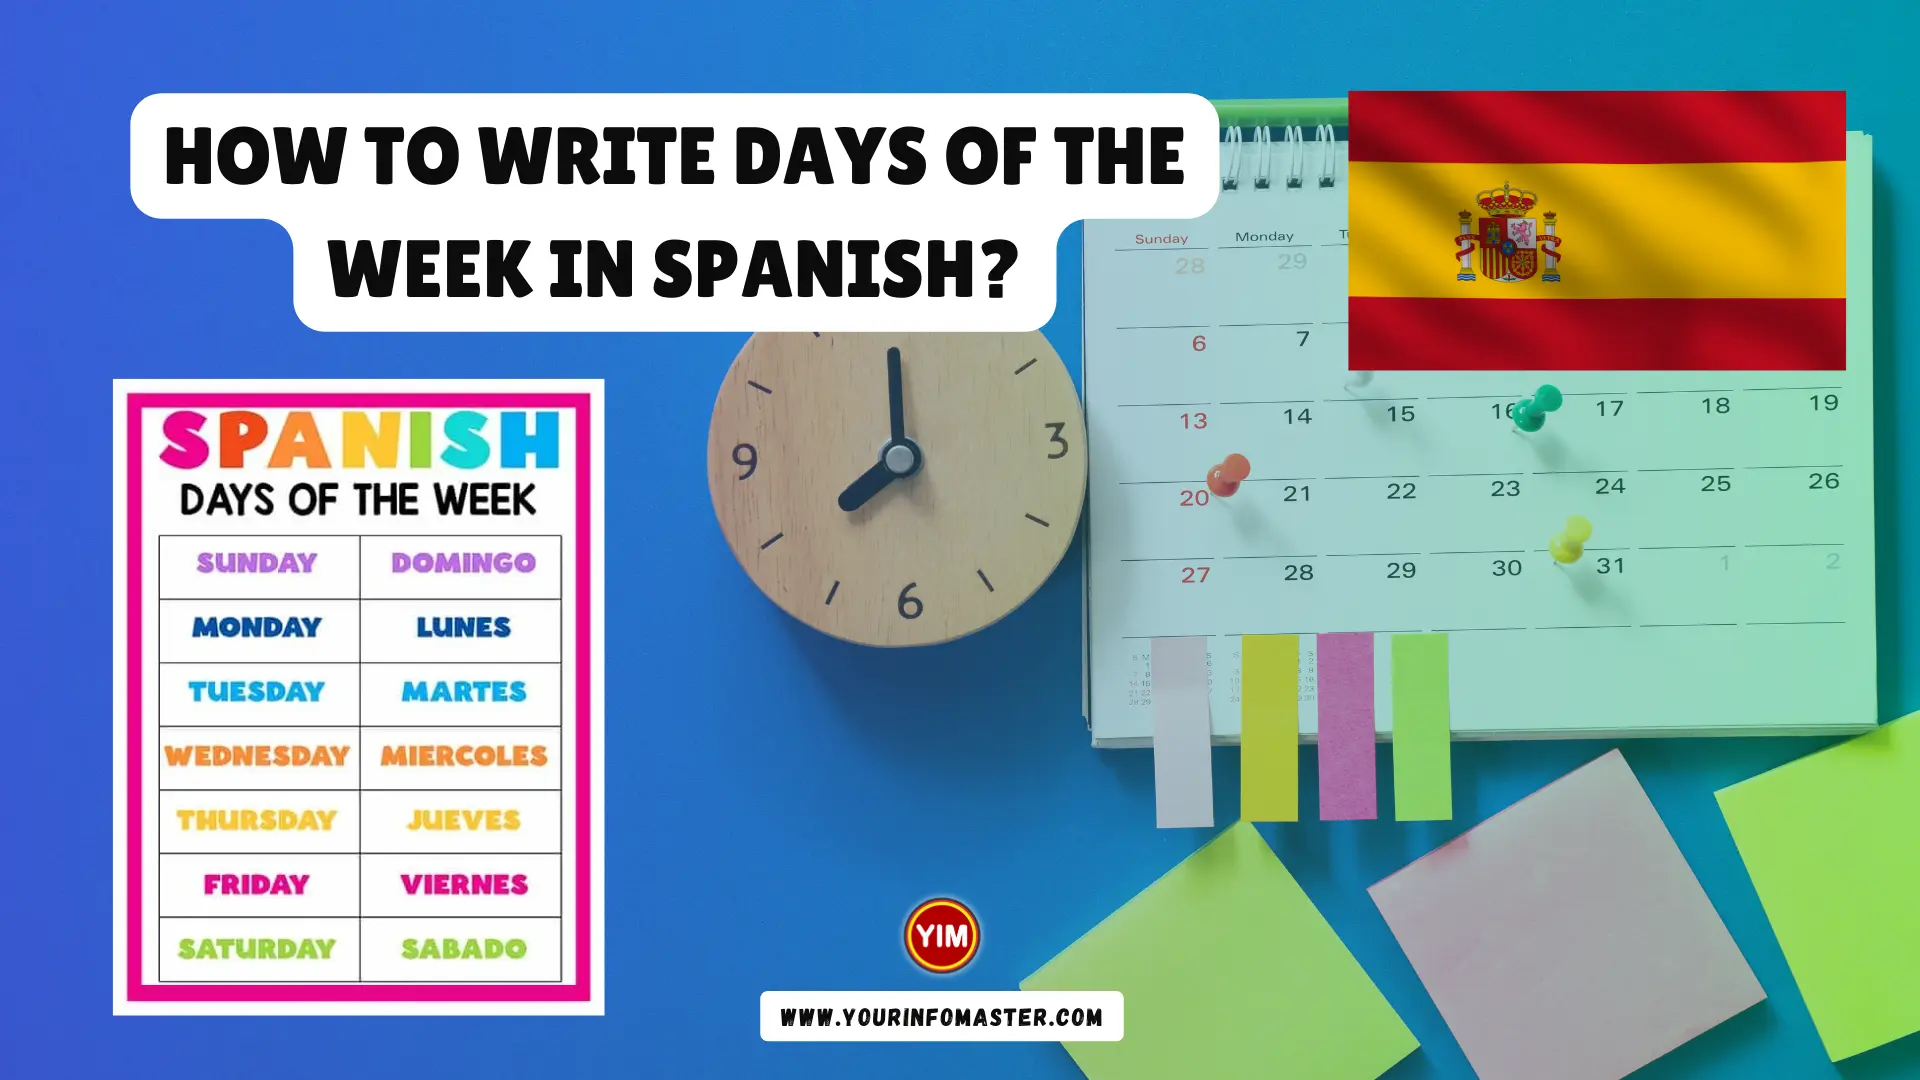 How to Write Days of the Week in Spanish